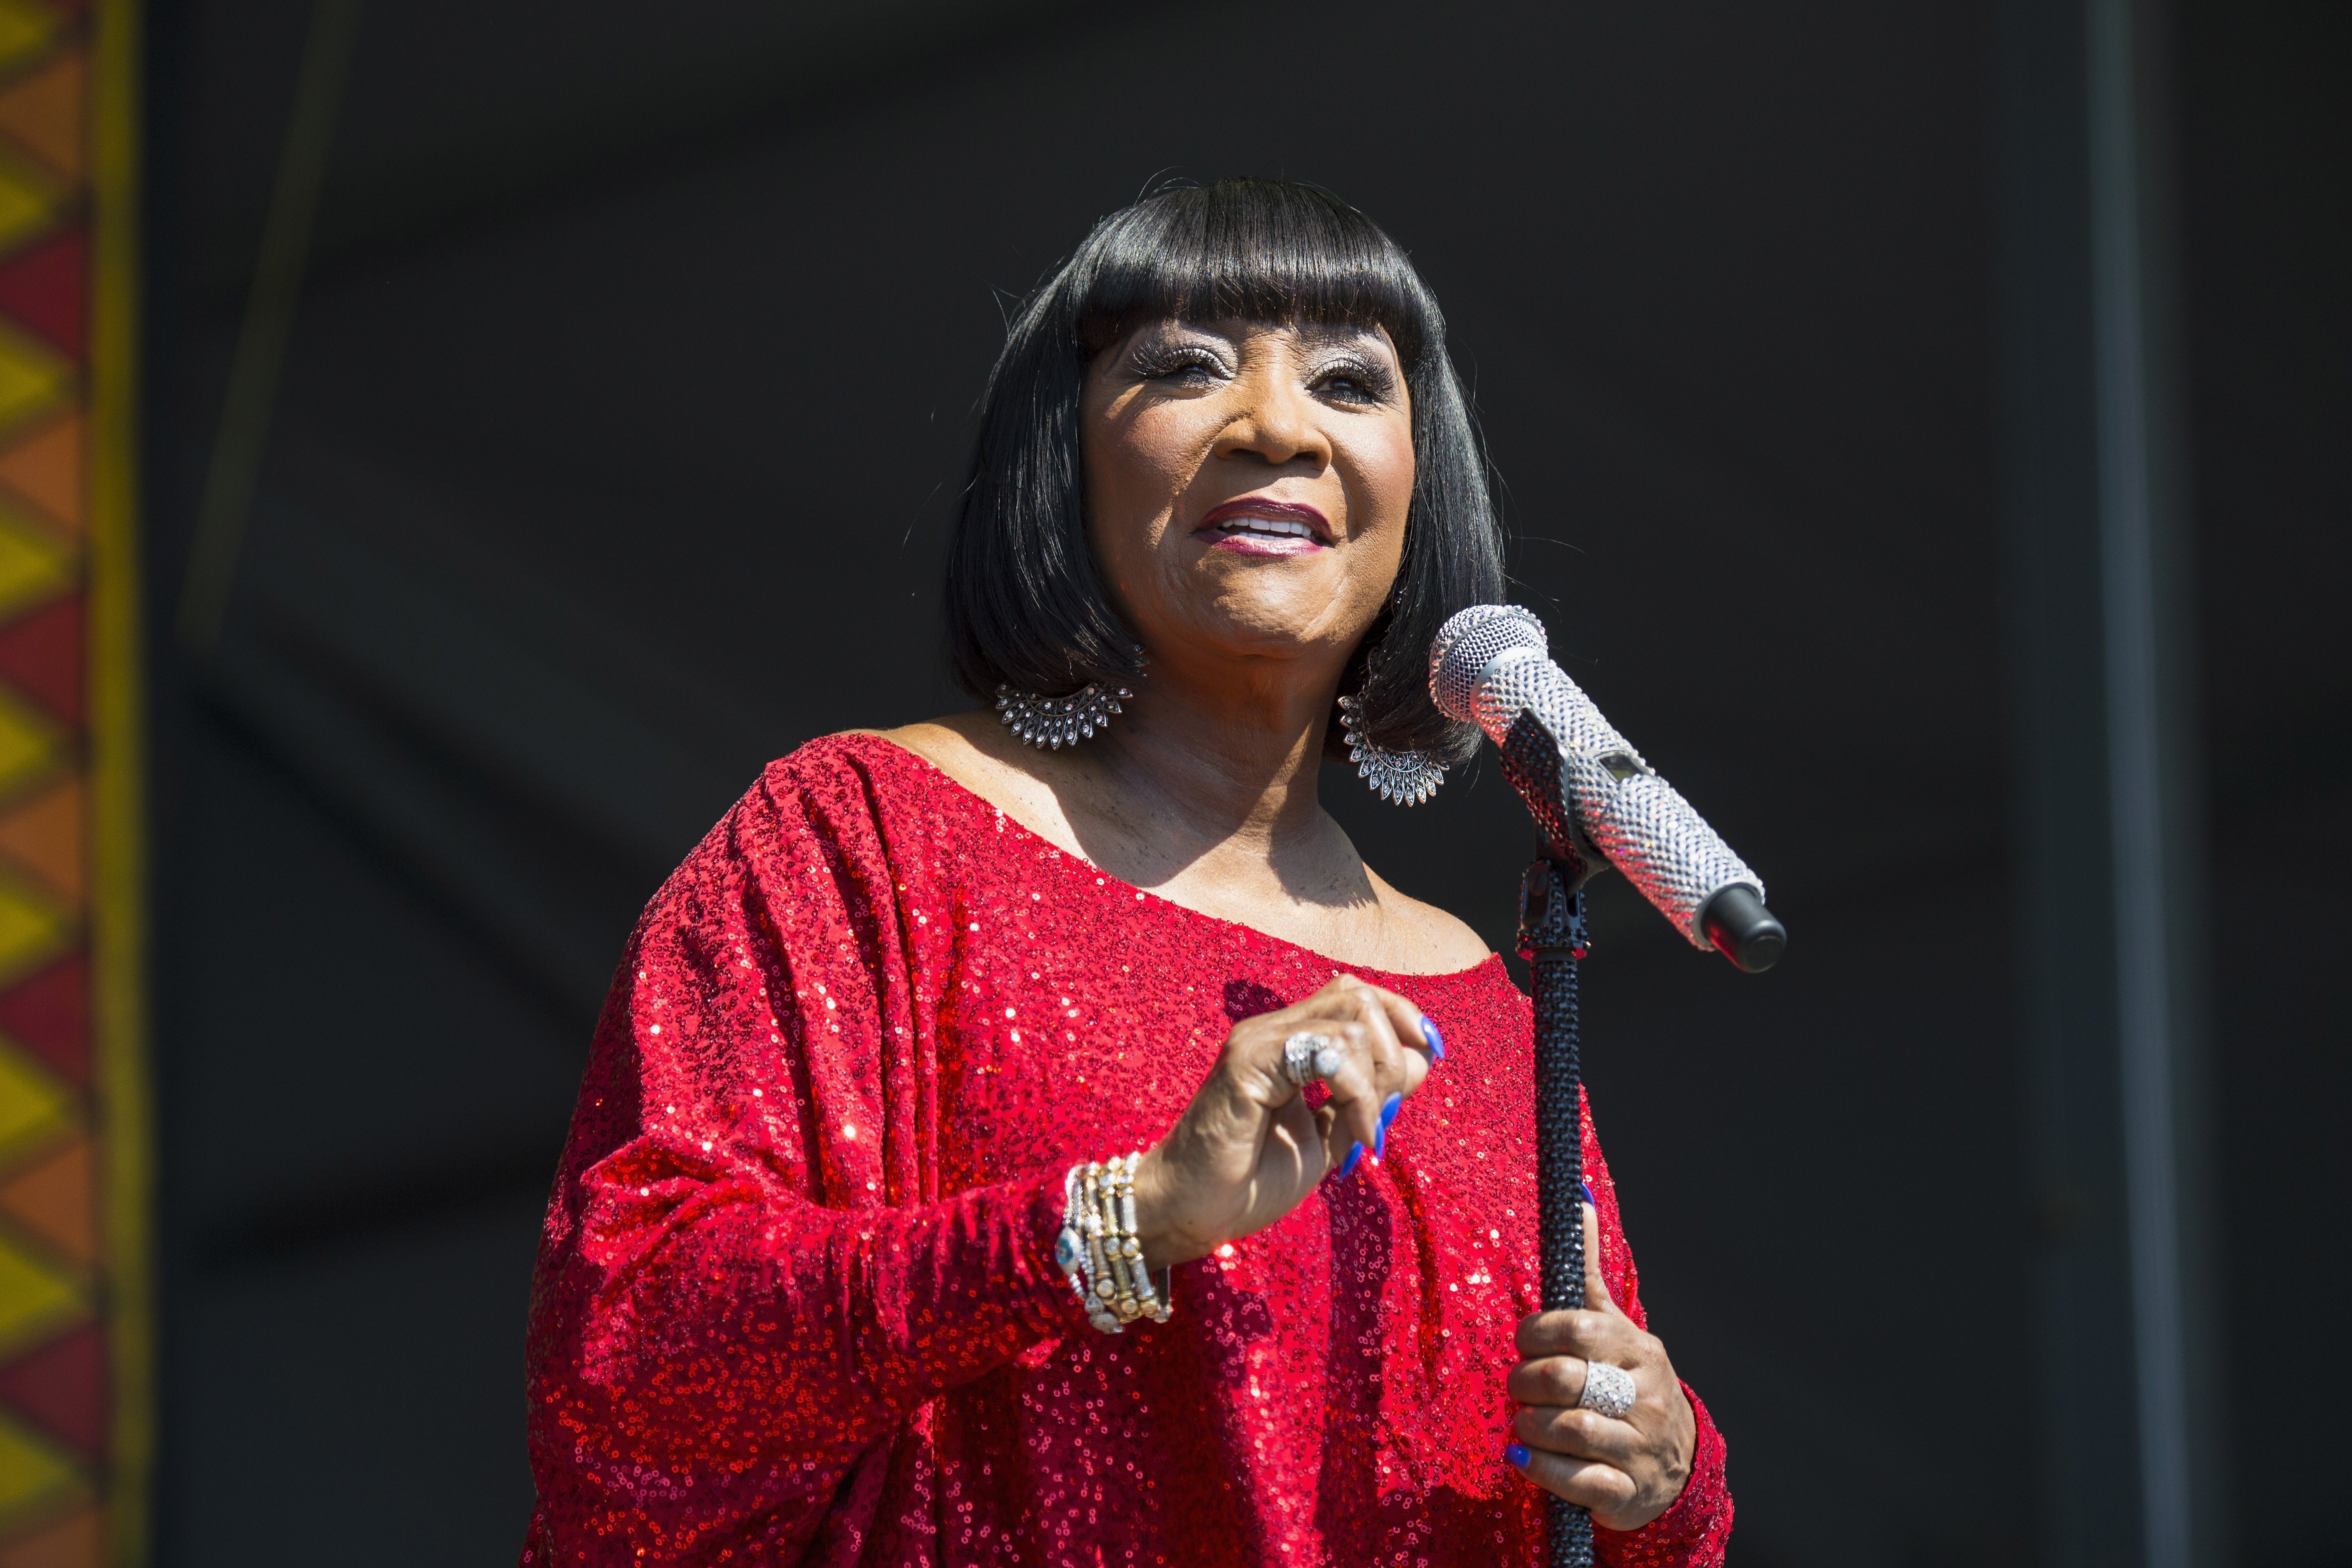 Patti LaBelle performs during the 2017 New Orleans Jazz & Heritage Festival at Fair Grounds Race Course on May 7, 2017. | Photo: Getty Images